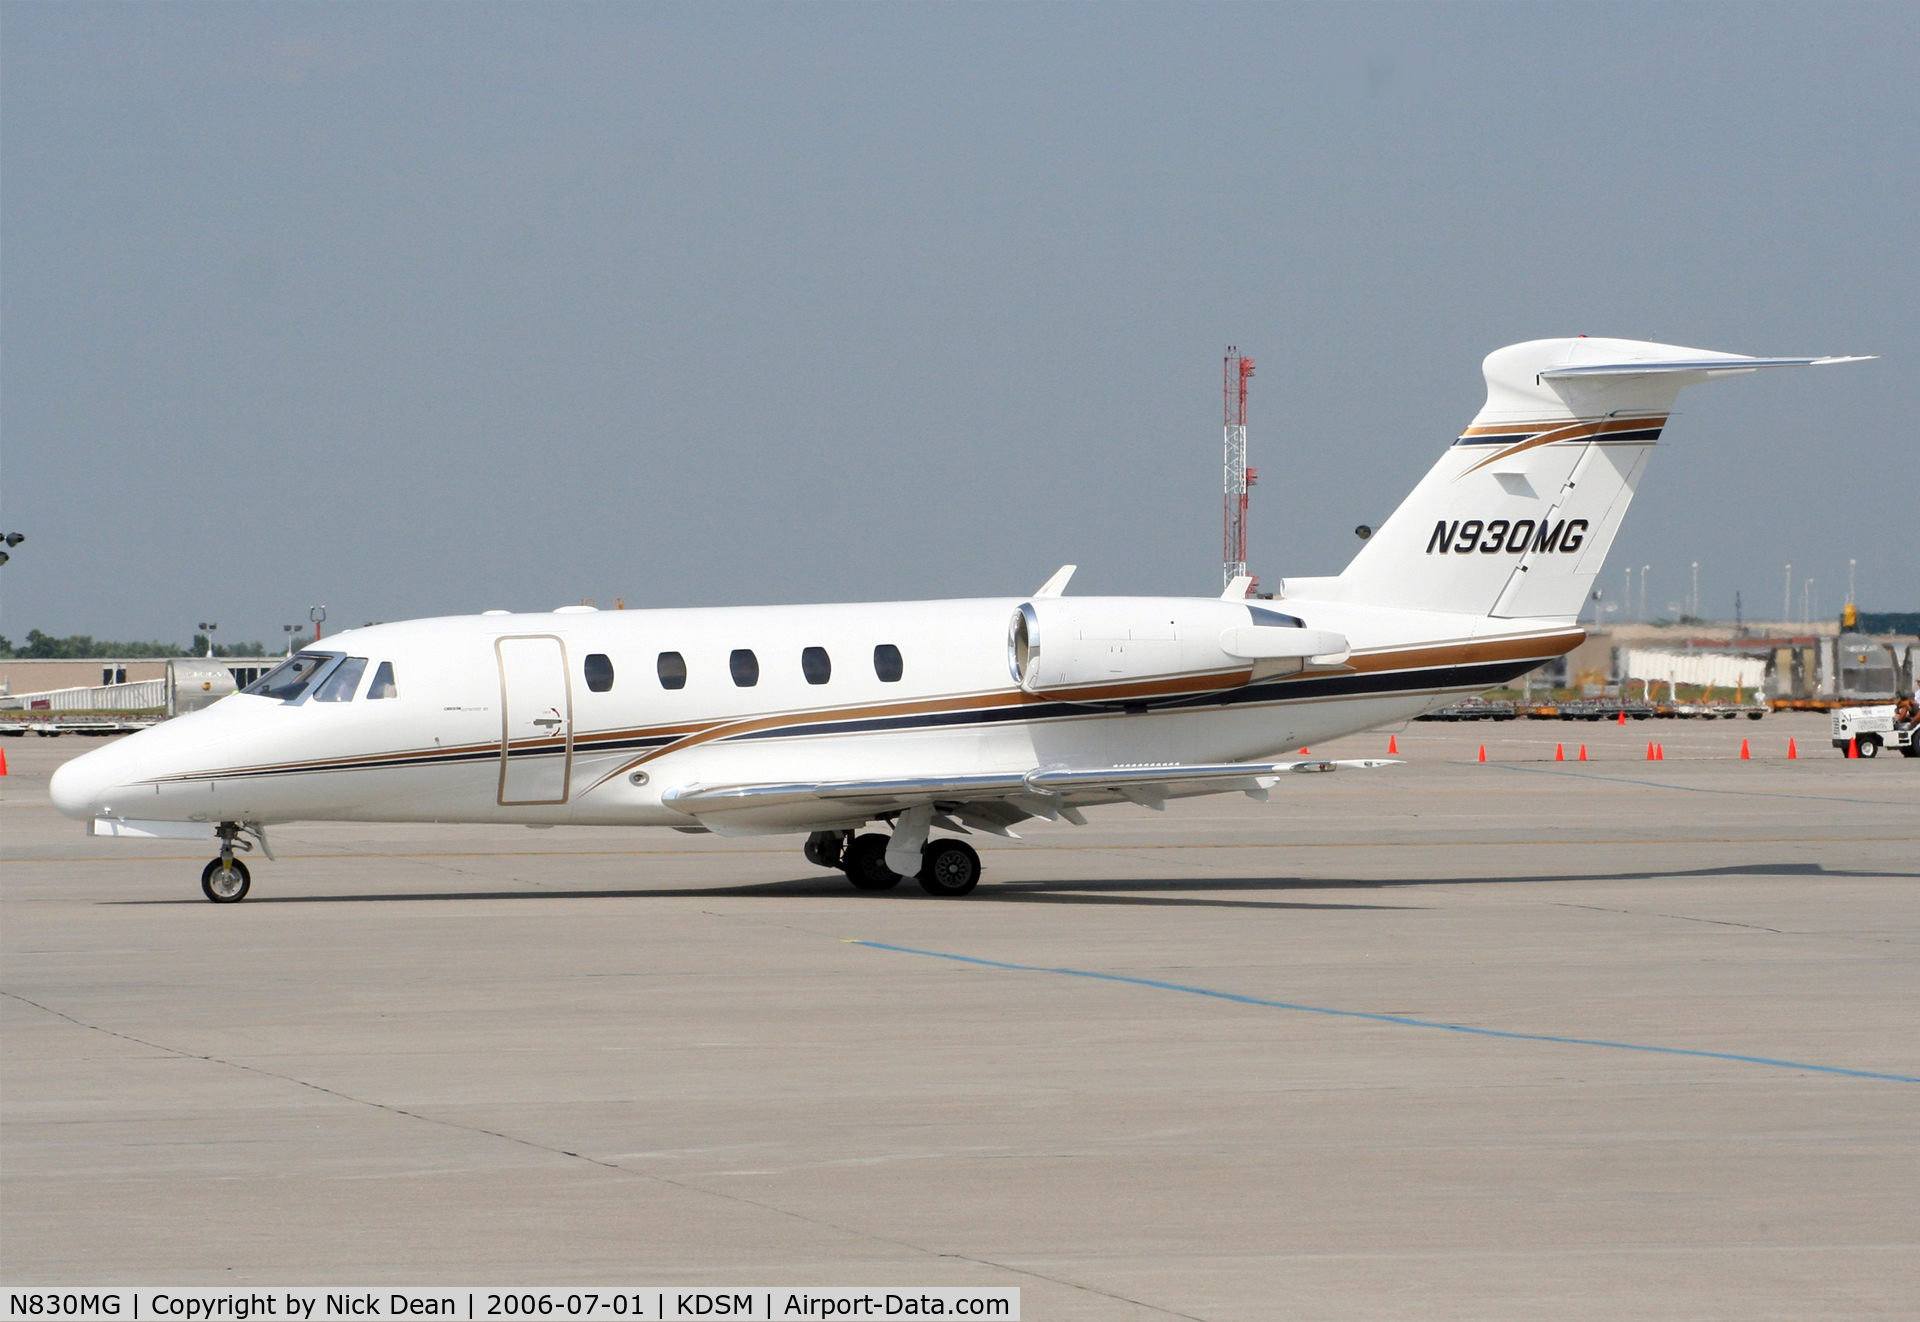 N830MG, 1991 Cessna 650 Citation C/N 650-0209, KDSM (Seen here as N930MG this airframe is currently registered N830MG as posted)